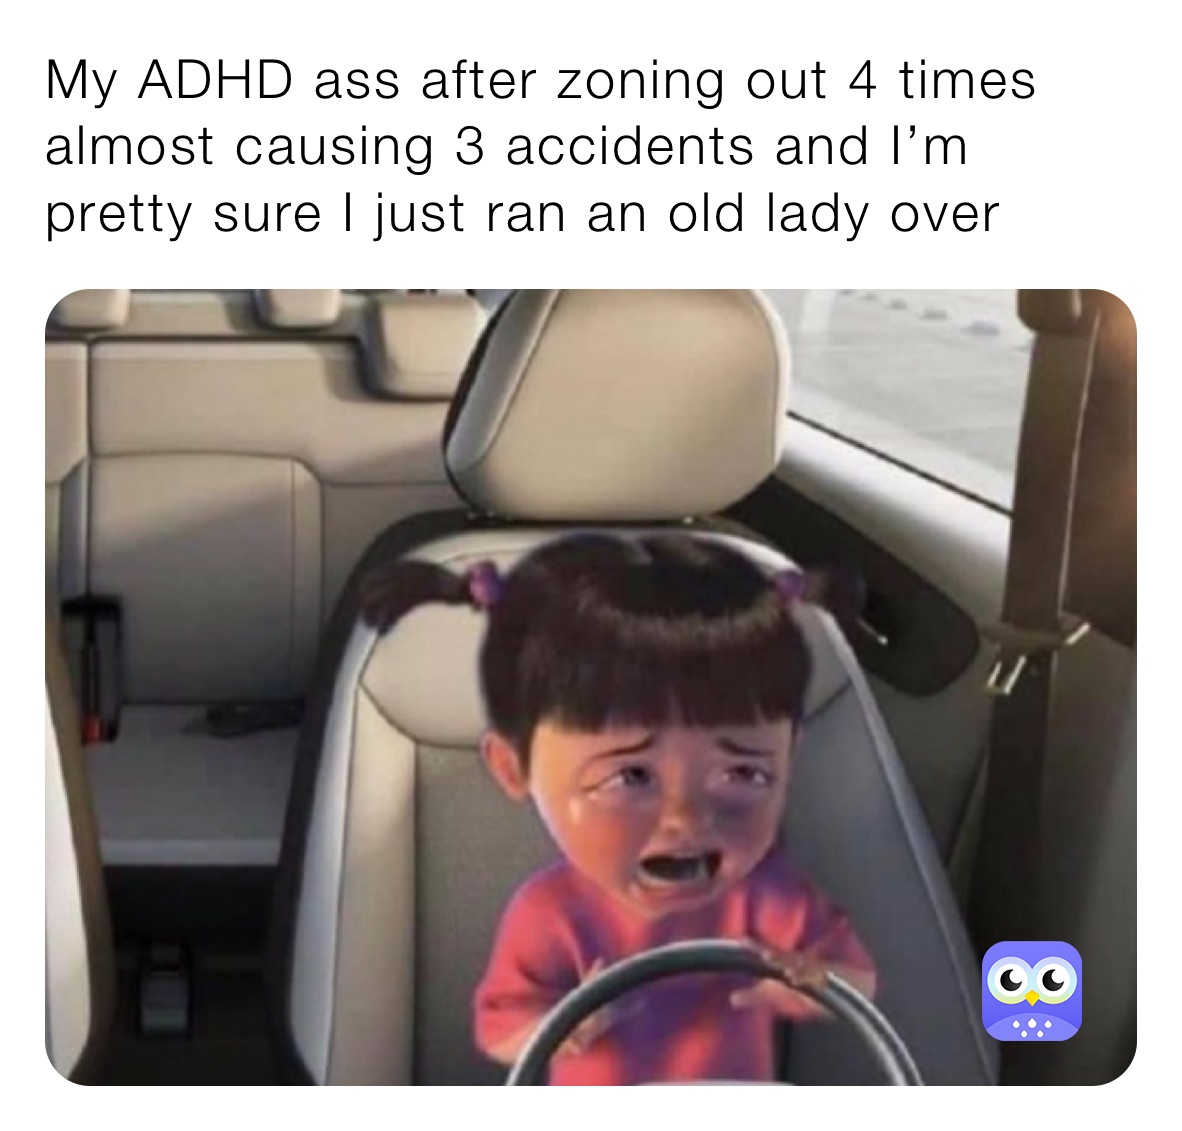 My ADHD ass after zoning out 4 times almost causing 3 accidents and I’m pretty sure I just ran an old lady over 